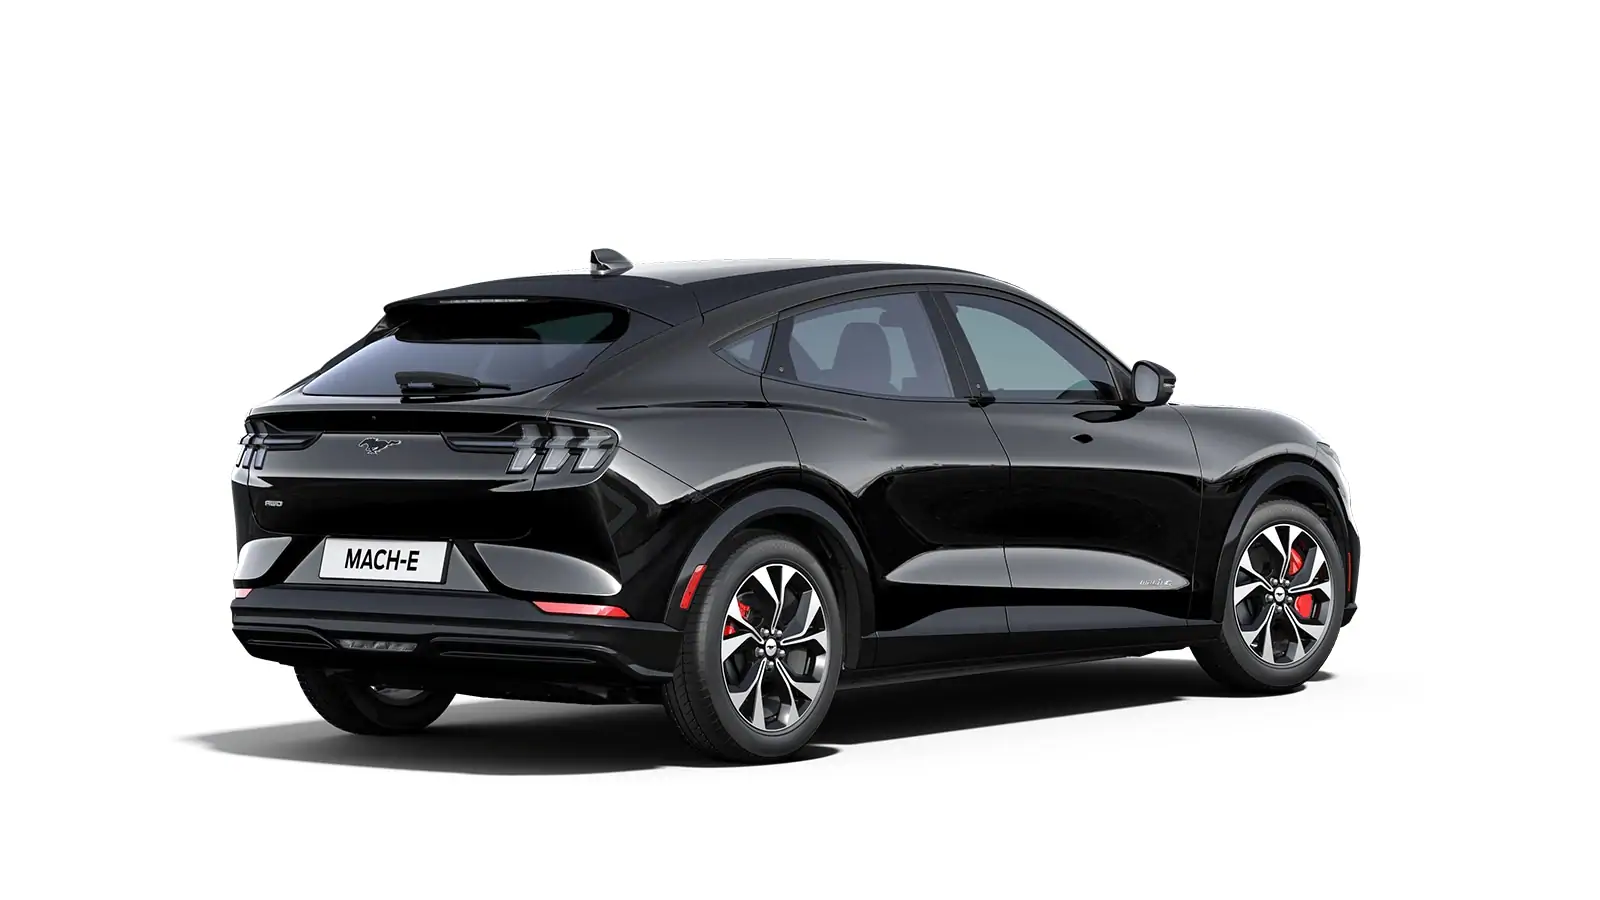 Nieuw Ford Mustang mach-e AWD 99kWh Extended Range 351pk/28kW - A1 7YB - "Absolute Black" Metaalkleur 4